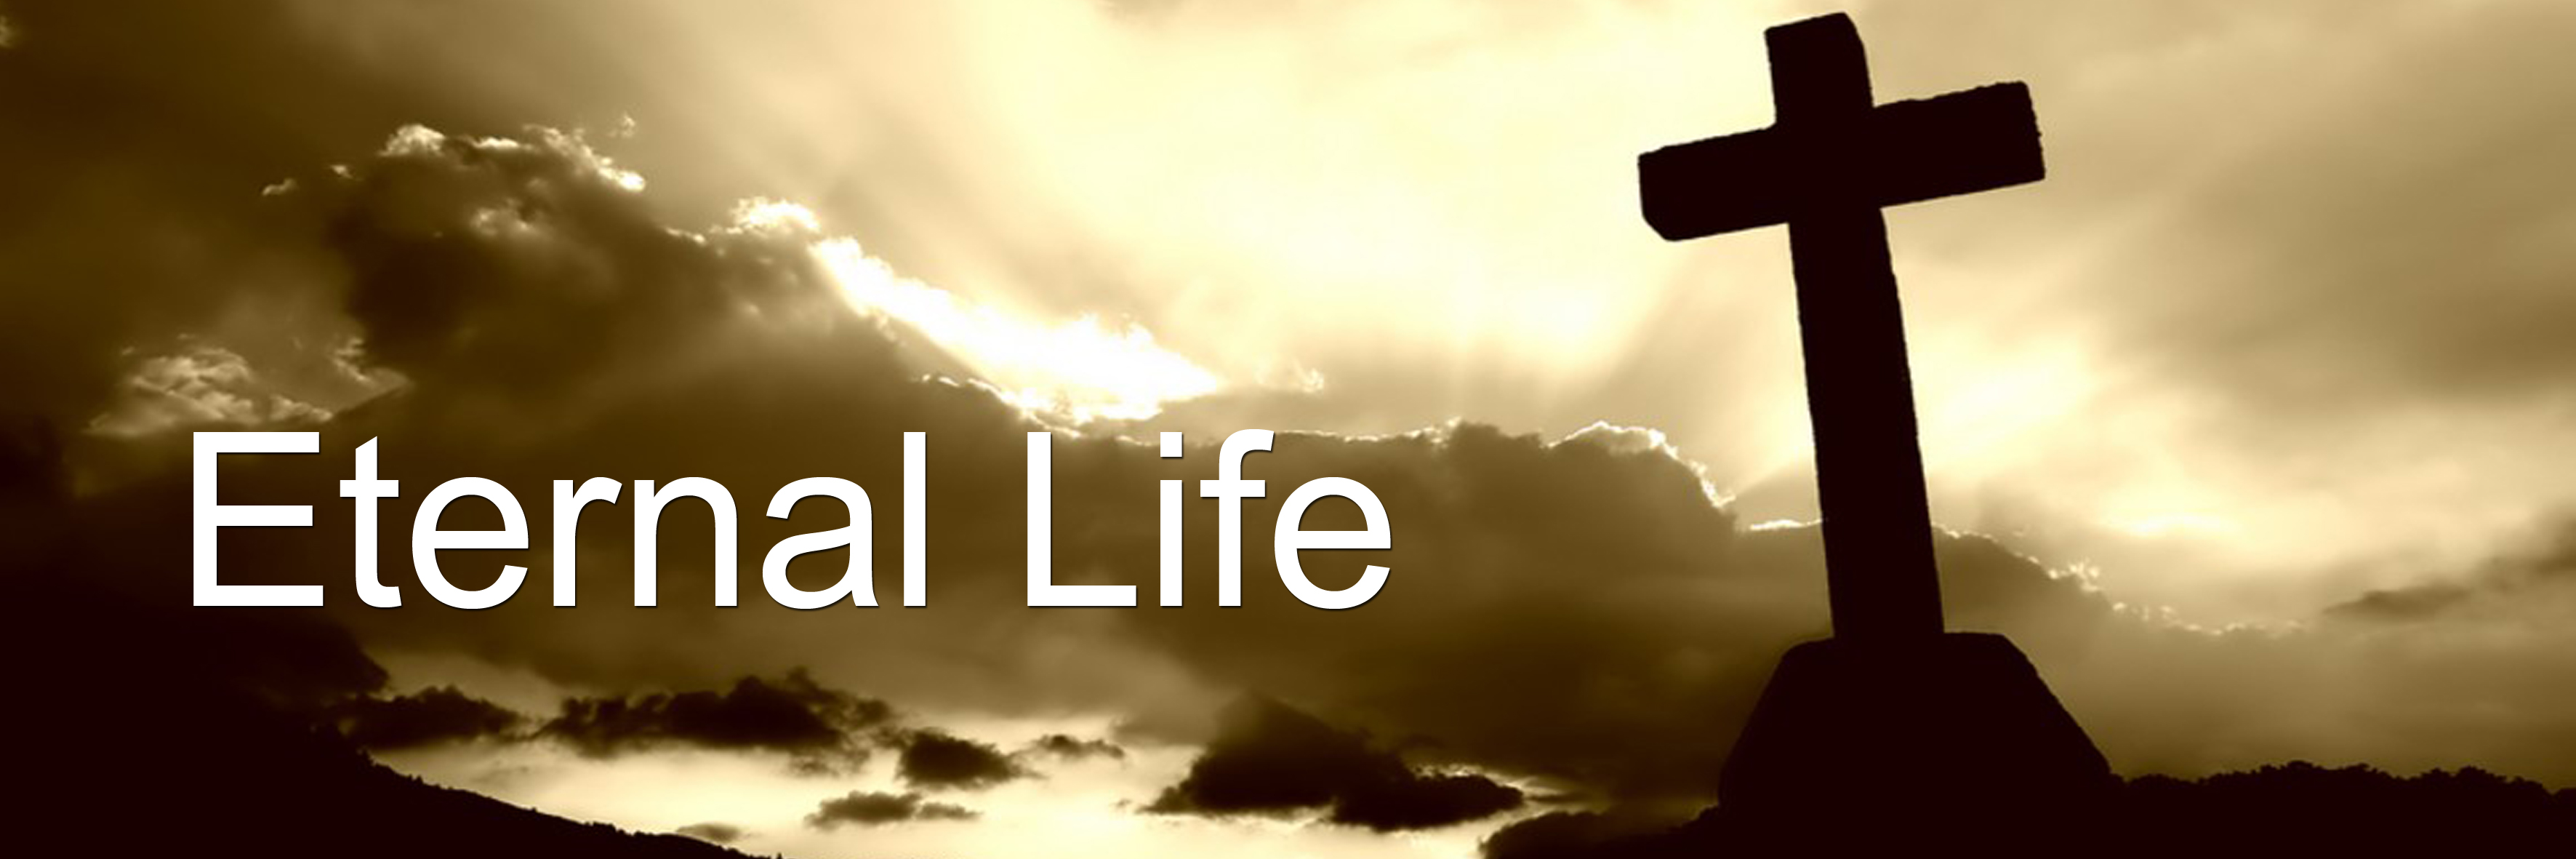 Life is life год. Eternal Life. Life for God. Eternal Life photo. Eternal Life логотип.